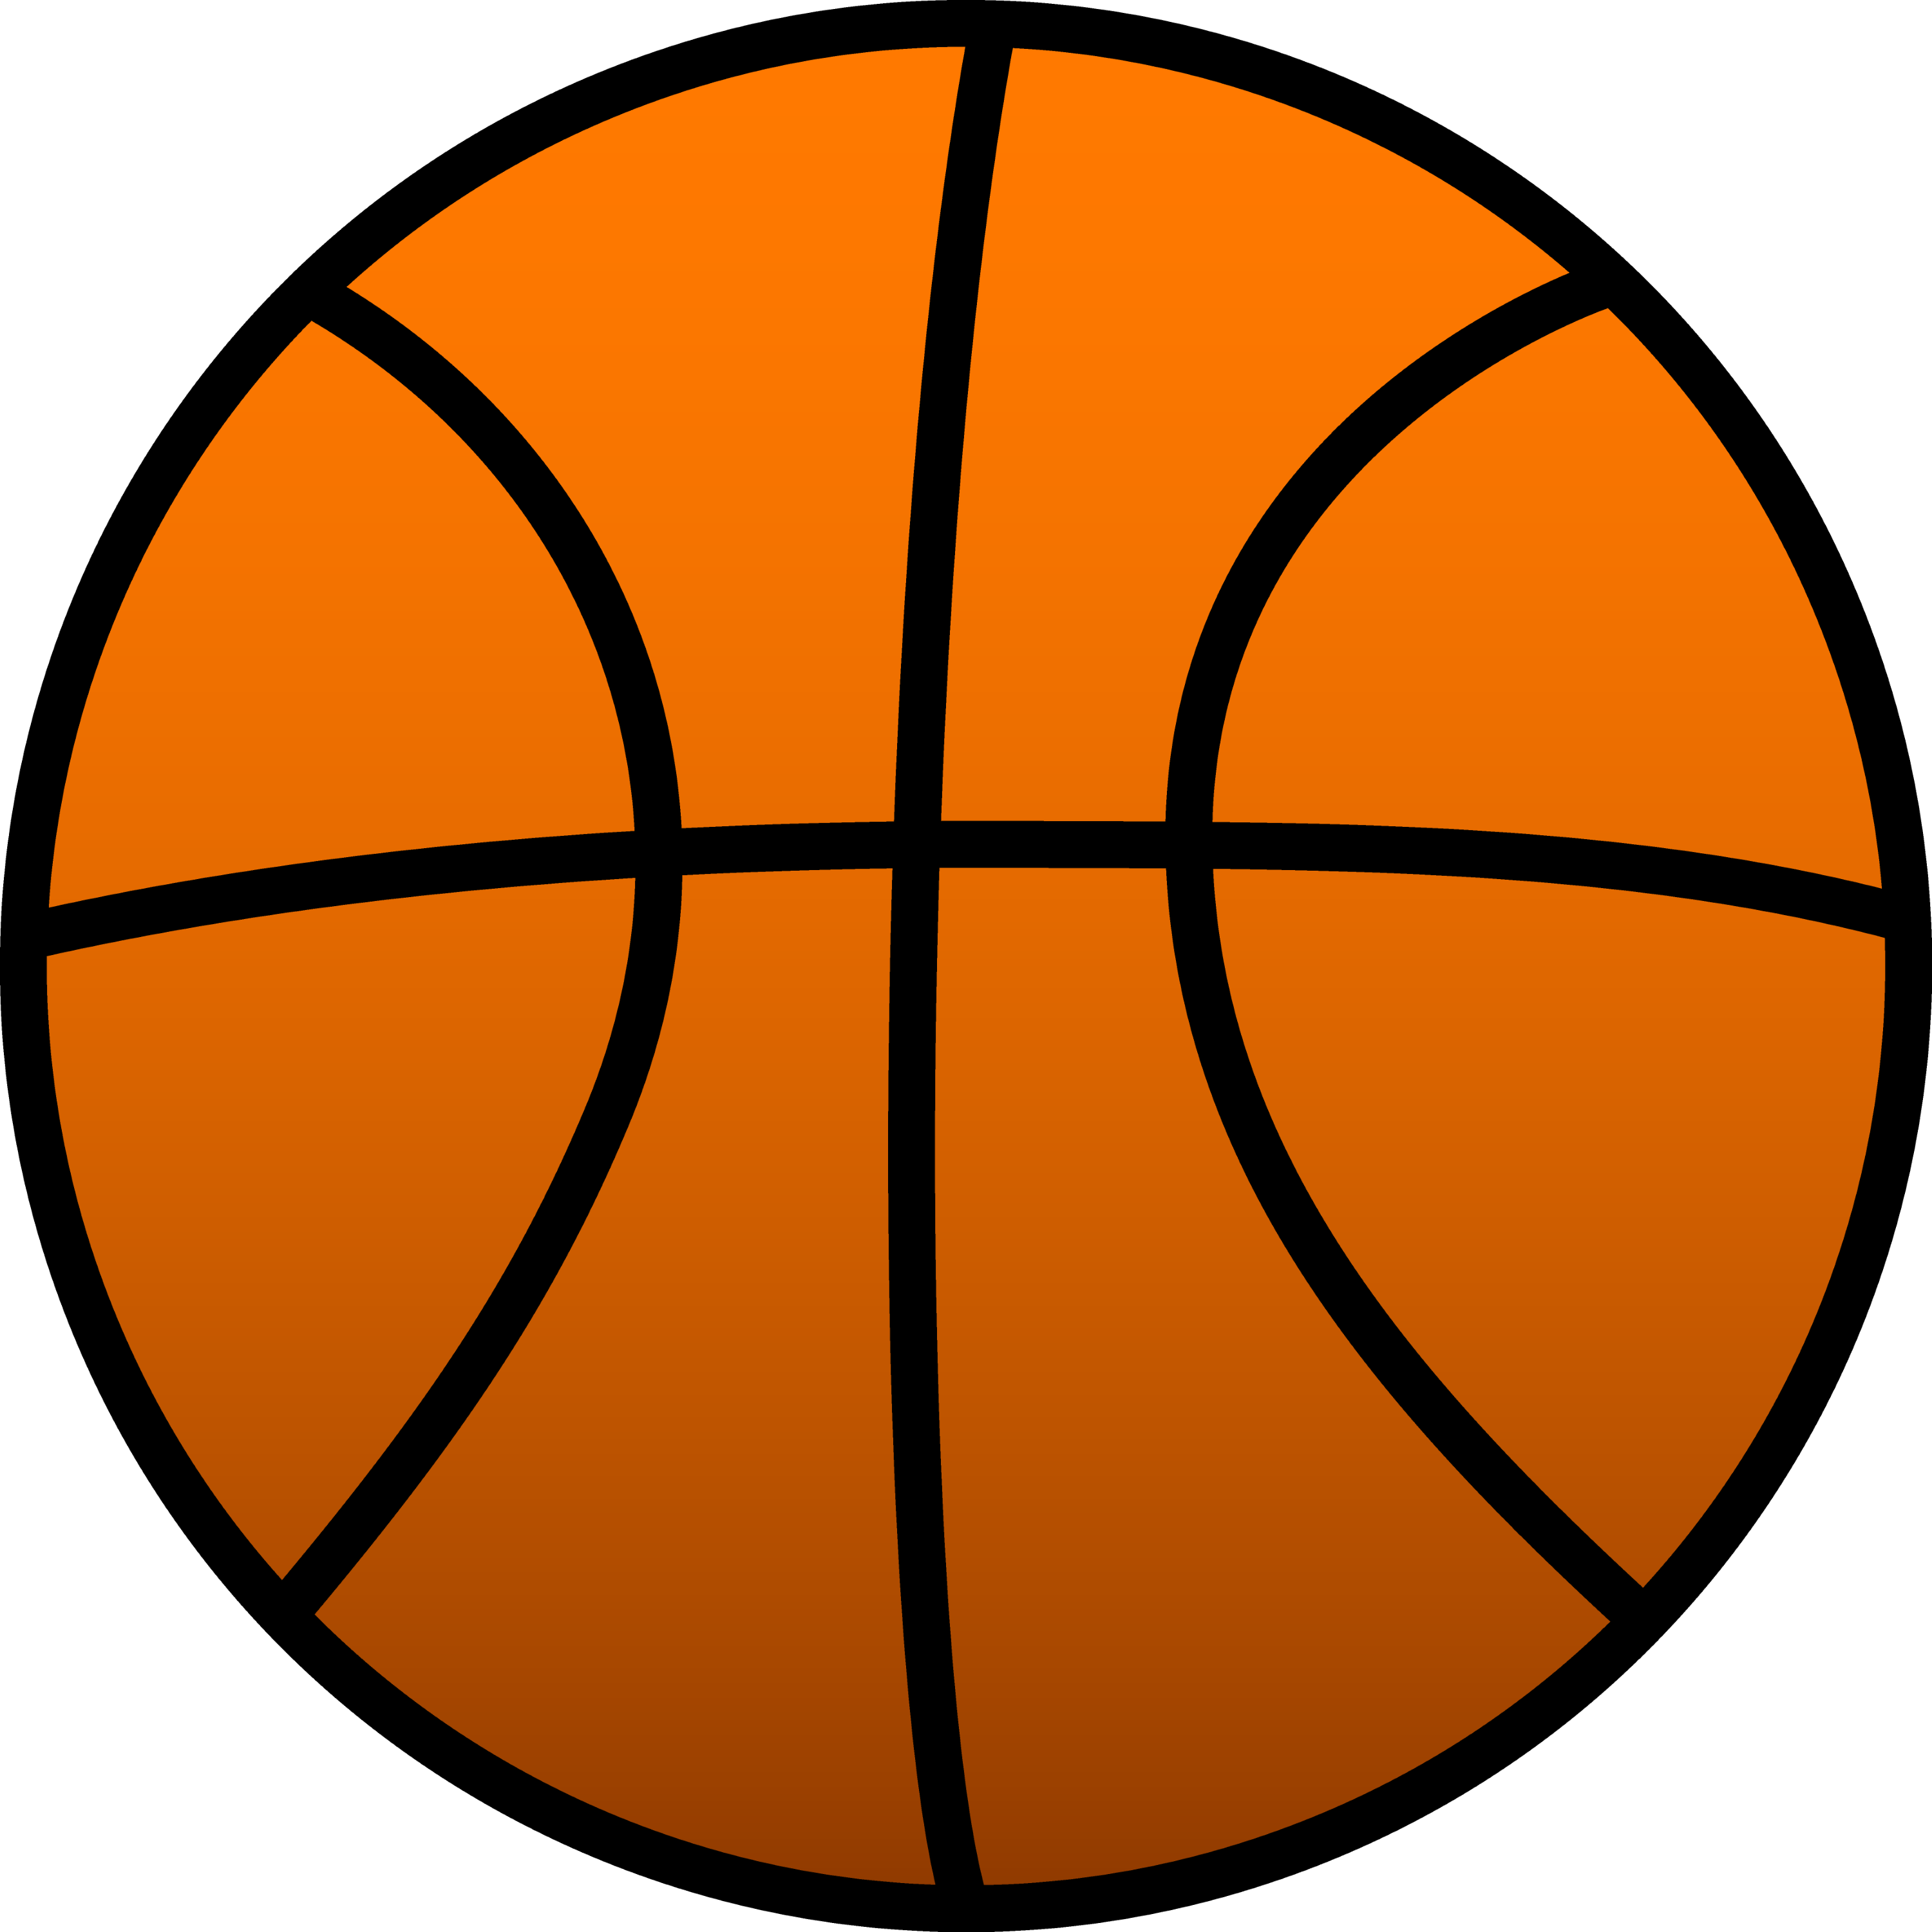 clip art images basketball - photo #10